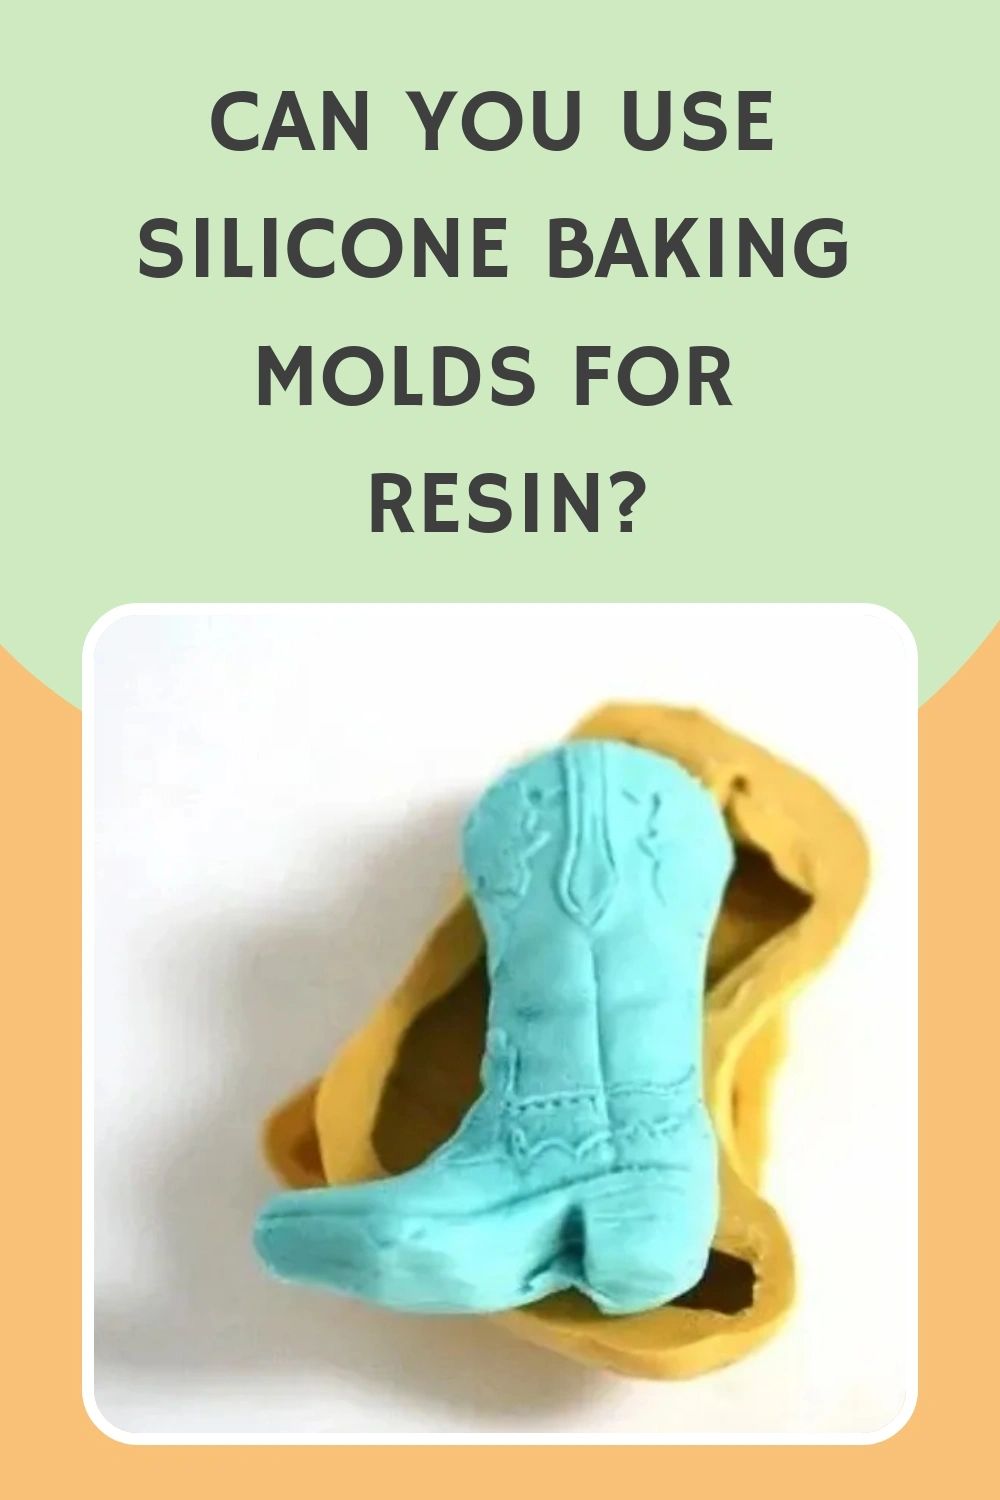 https://img1.wsimg.com/isteam/ip/2e67919d-5f98-41a3-921e-2716f8646f4c/Can-You-Use-Silicone-Baking-Molds-For-Resin--.jpeg